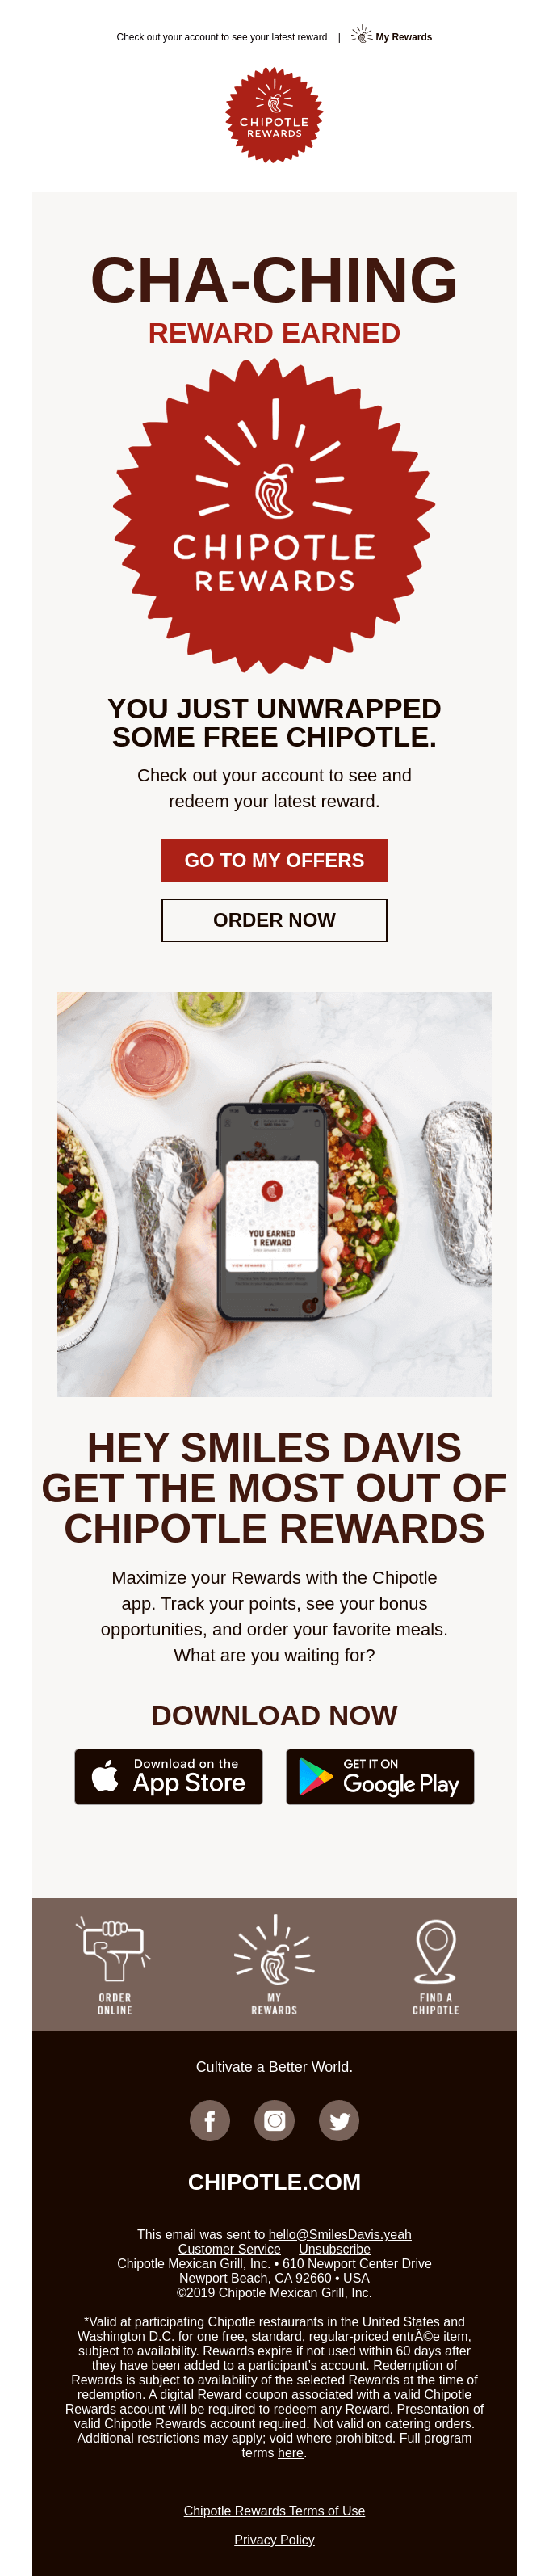 Reward notification email from Chipotle